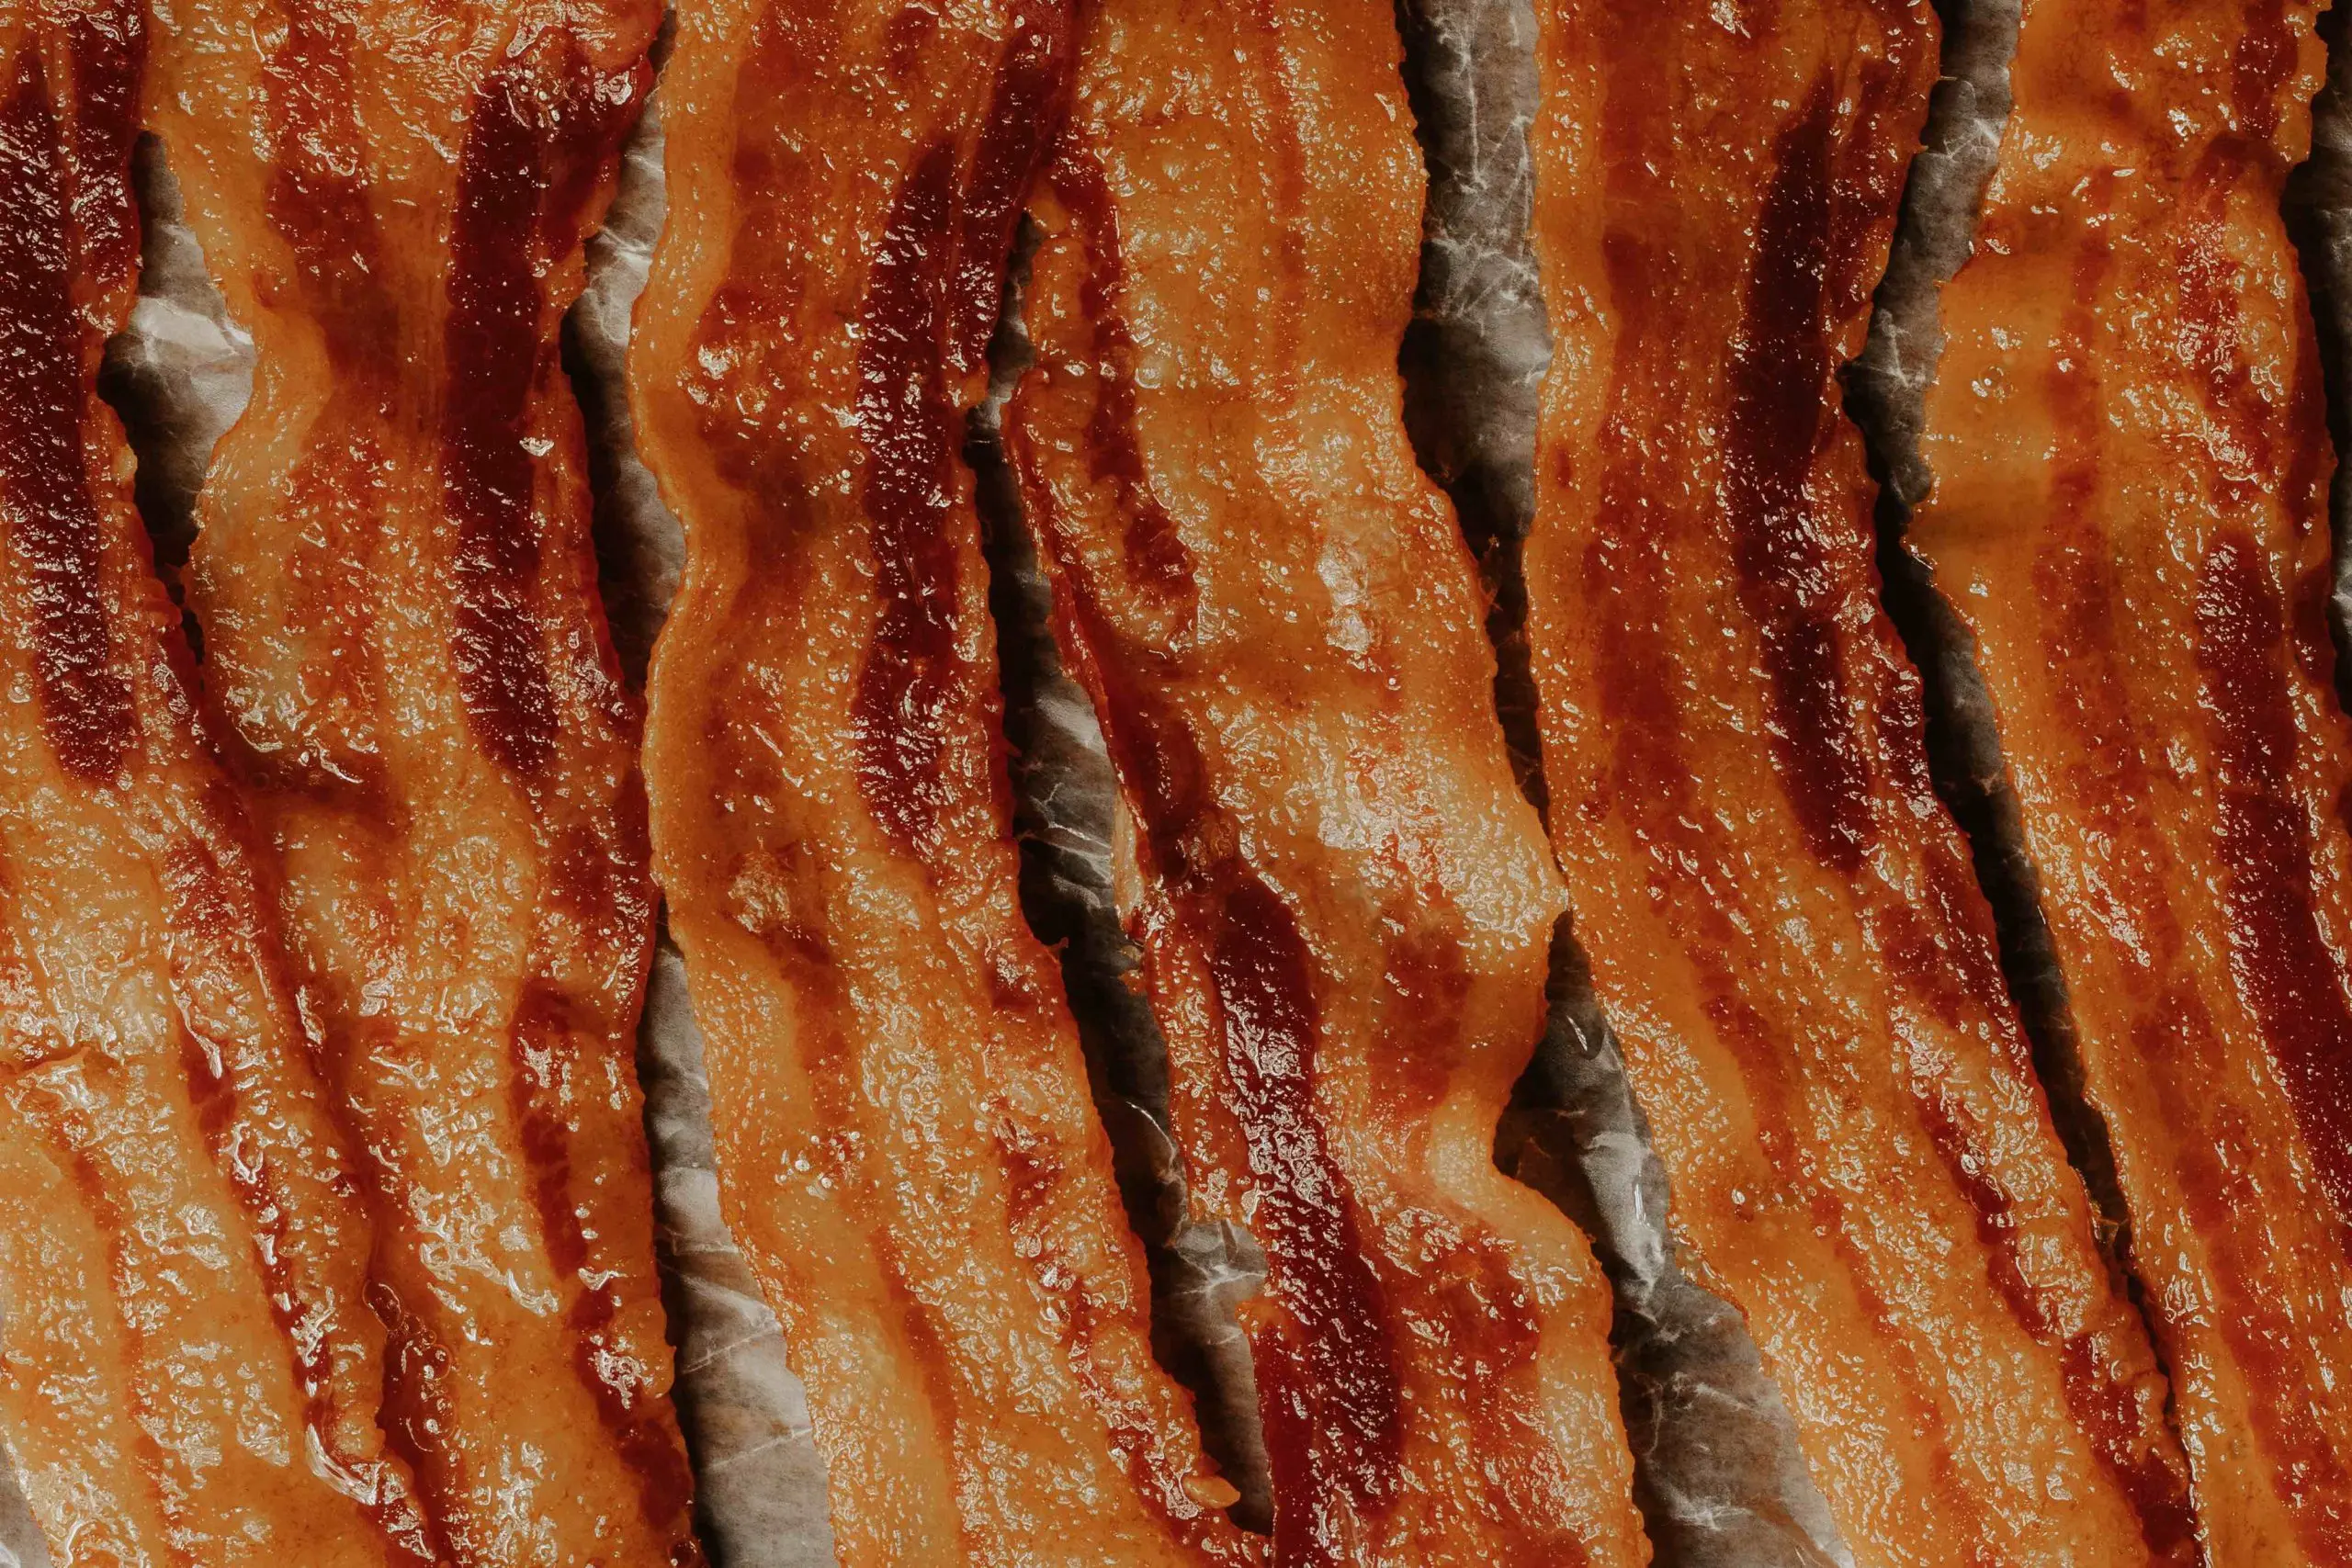 can dogs eat smoked bacon - Is it okay if a dog eats bacon